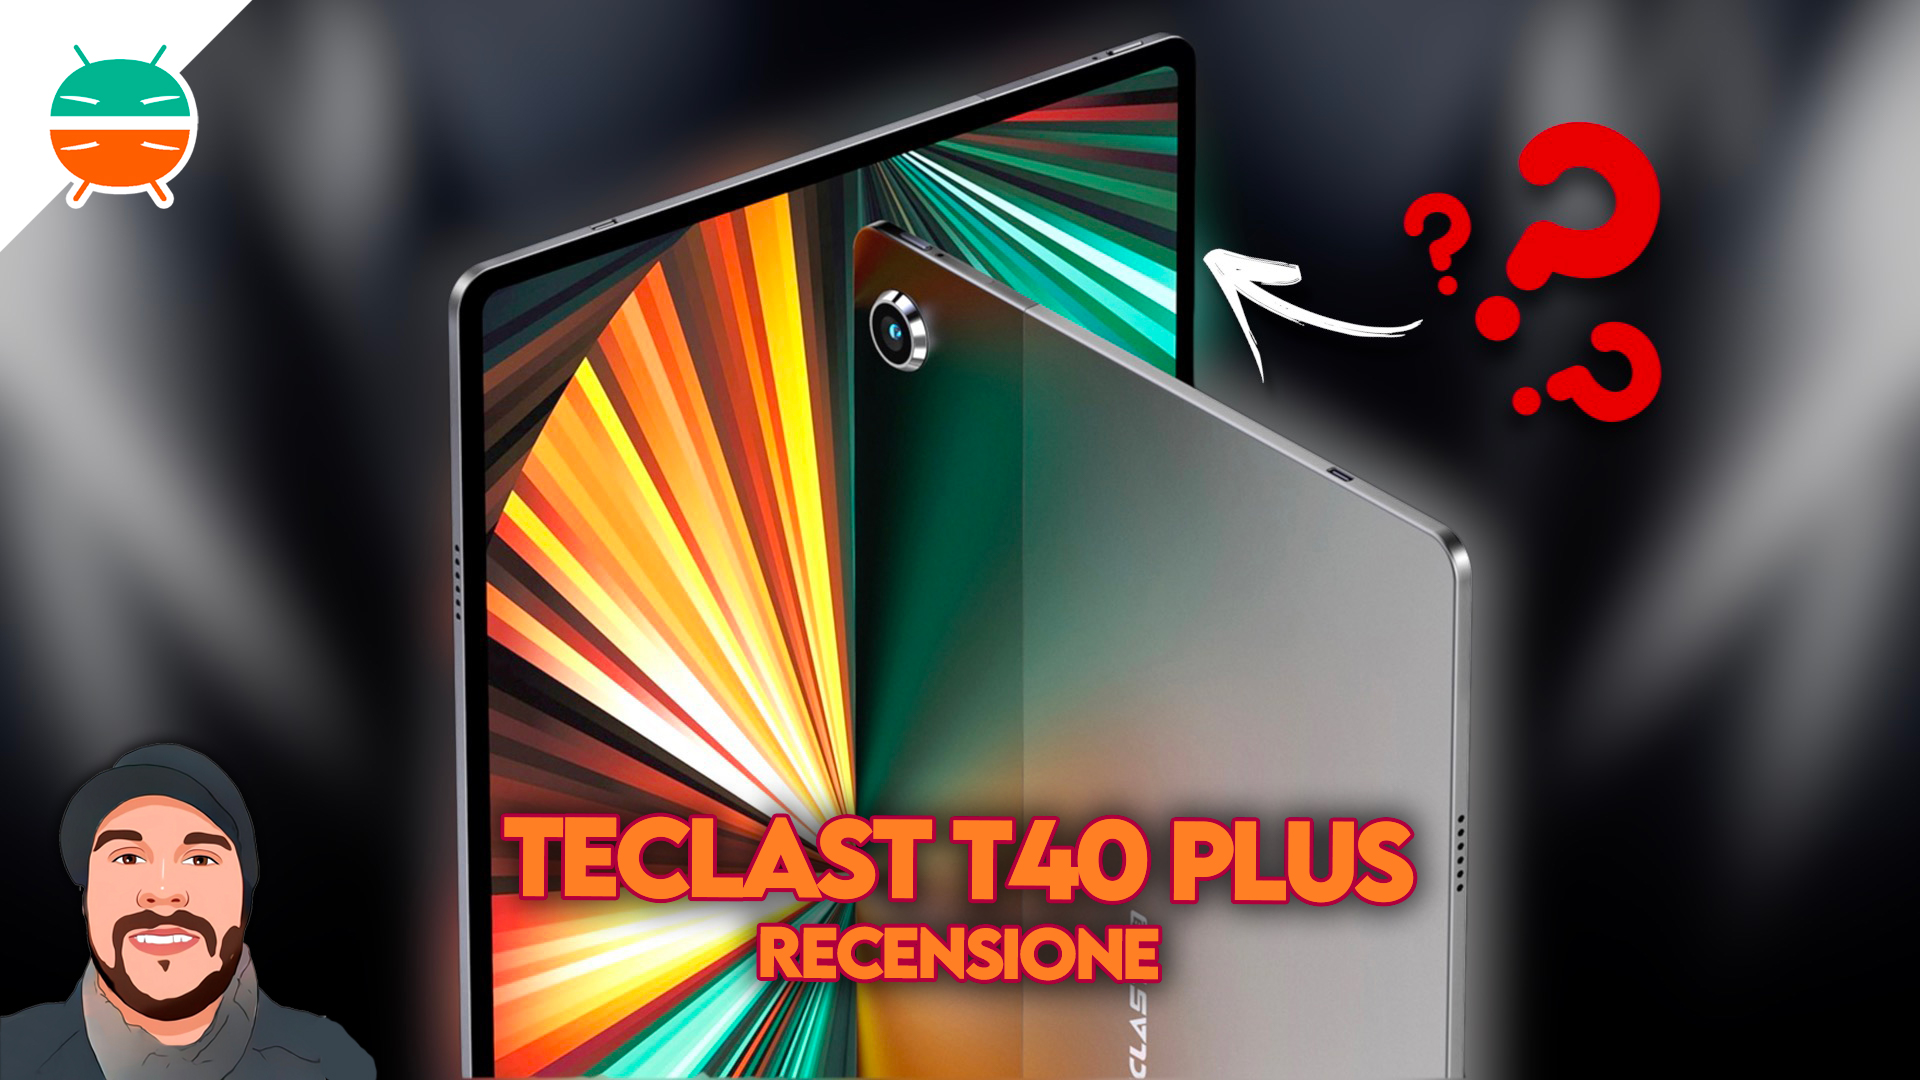 Teclast T40 Plus review: economical, solid and functional